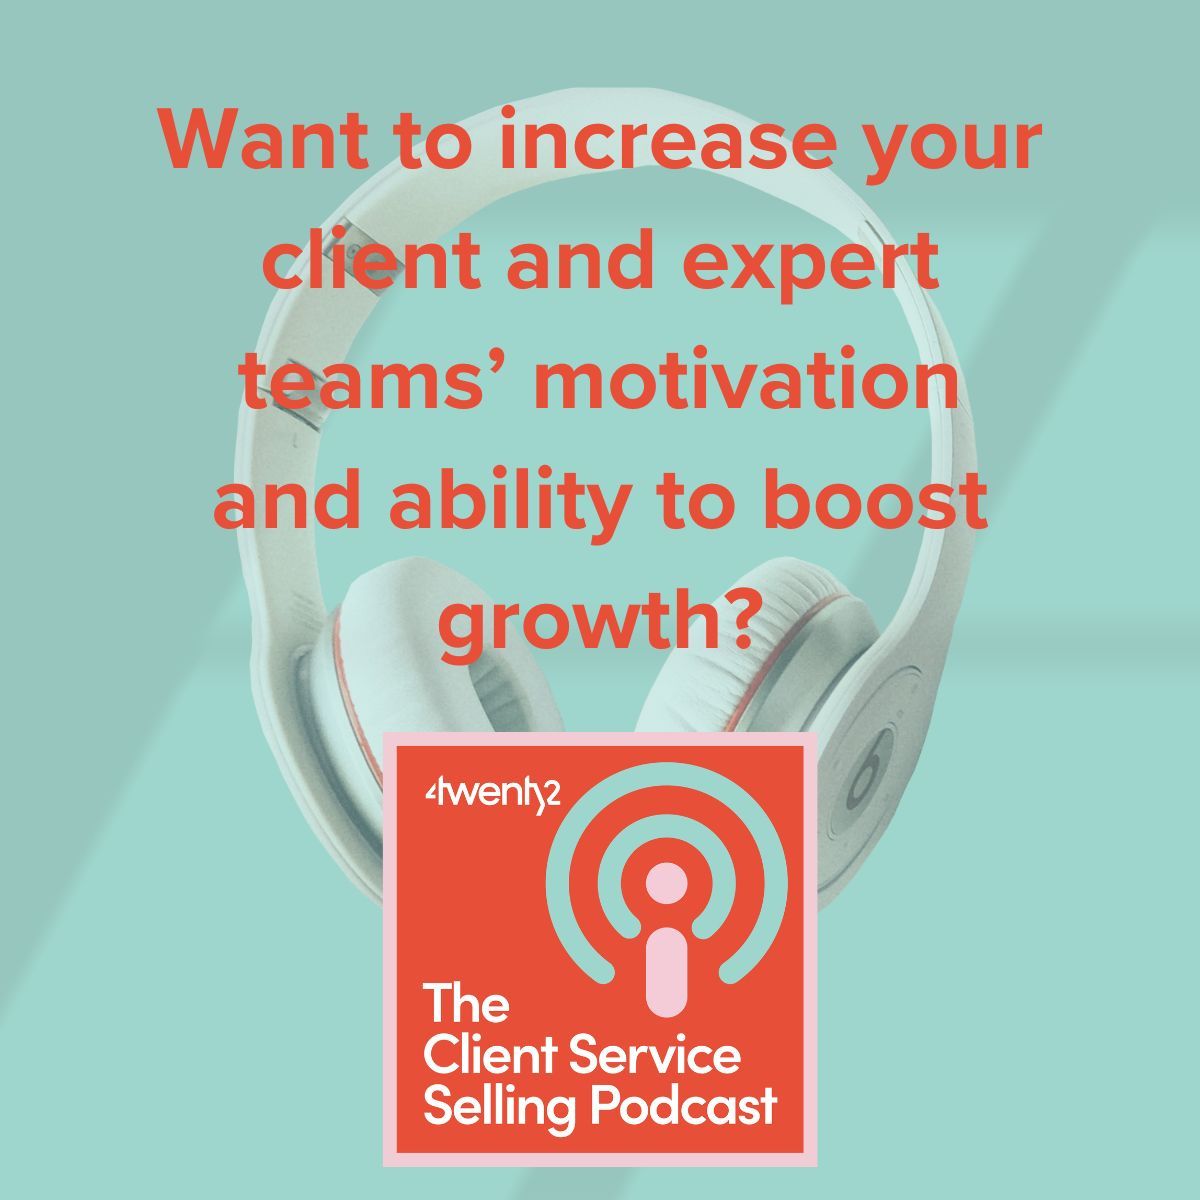 We cover the third proven element that boosts your client and expert teams’ motivation and ability to boost growth in our latest podcast. Want to know what it is and get started applying it for your own boost? #clientservicesellingpodcast #begrowth. 
4twenty2.co.uk/podcast